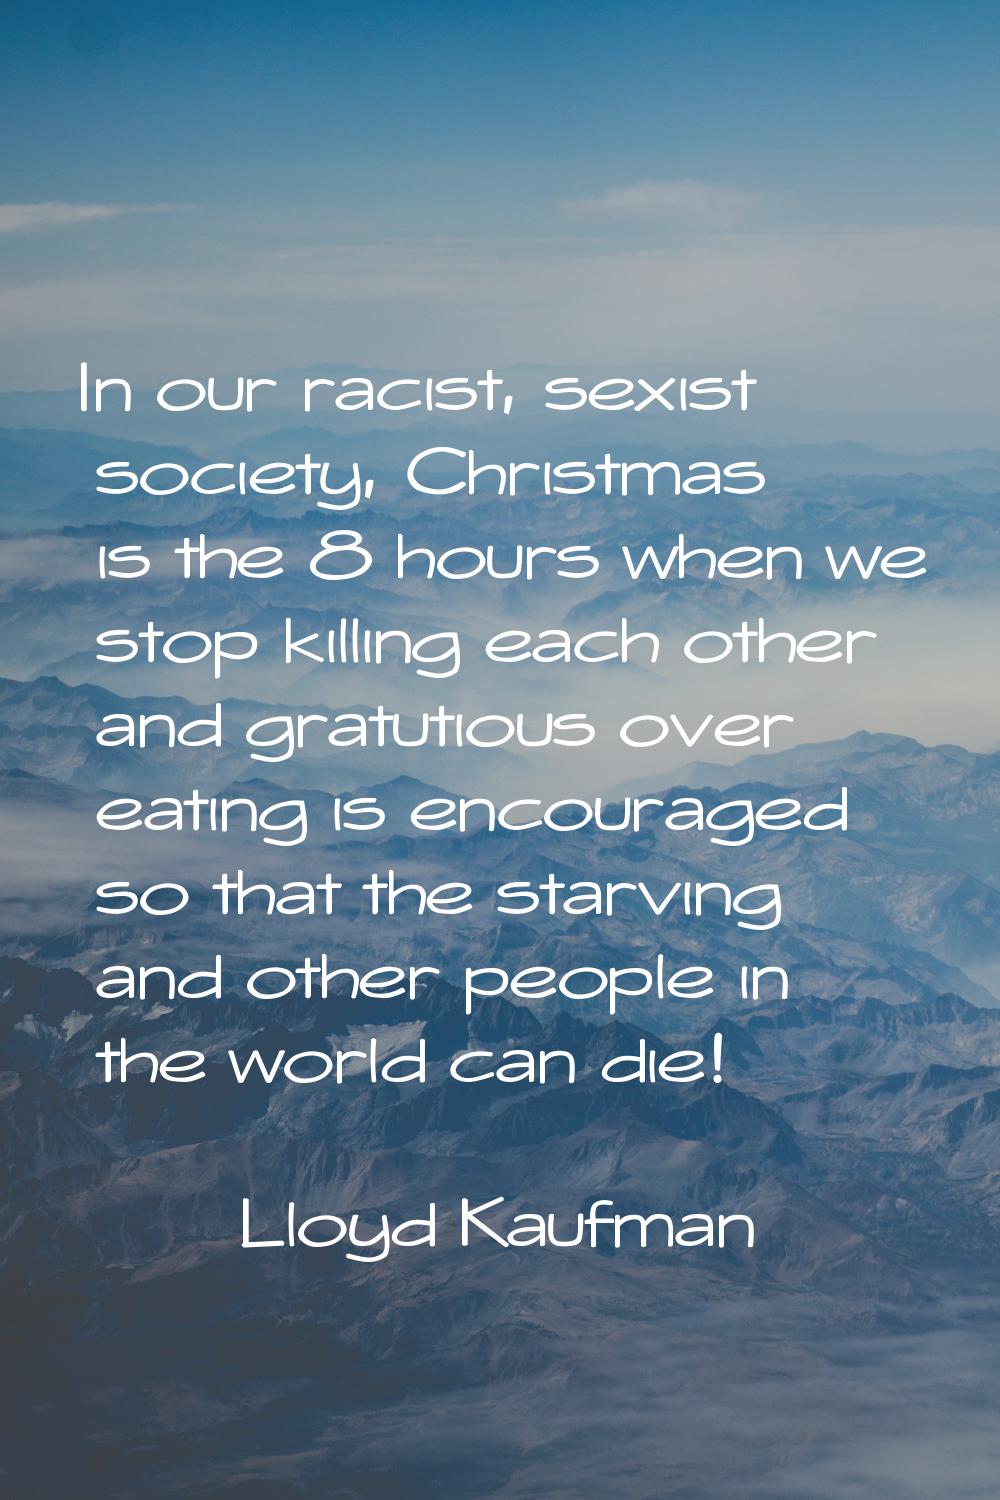 In our racist, sexist society, Christmas is the 8 hours when we stop killing each other and gratuti